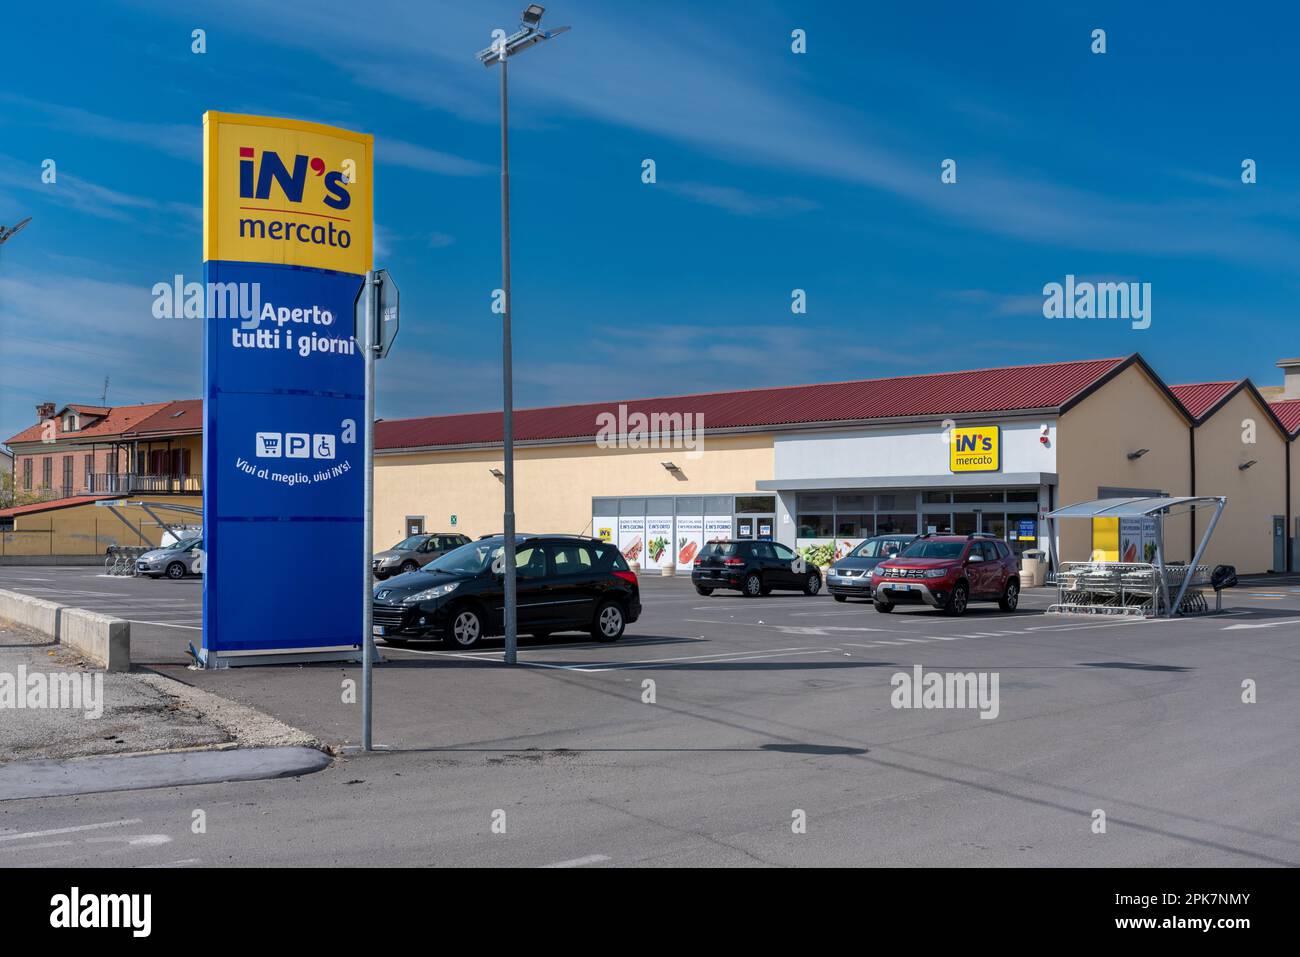 Sommariva Bosco, Cuneo, Italy - April 05, 2023: Exterior view of the INS Mercato supermarket with totem sign with INS logo on blue sky with clouds, IN Stock Photo